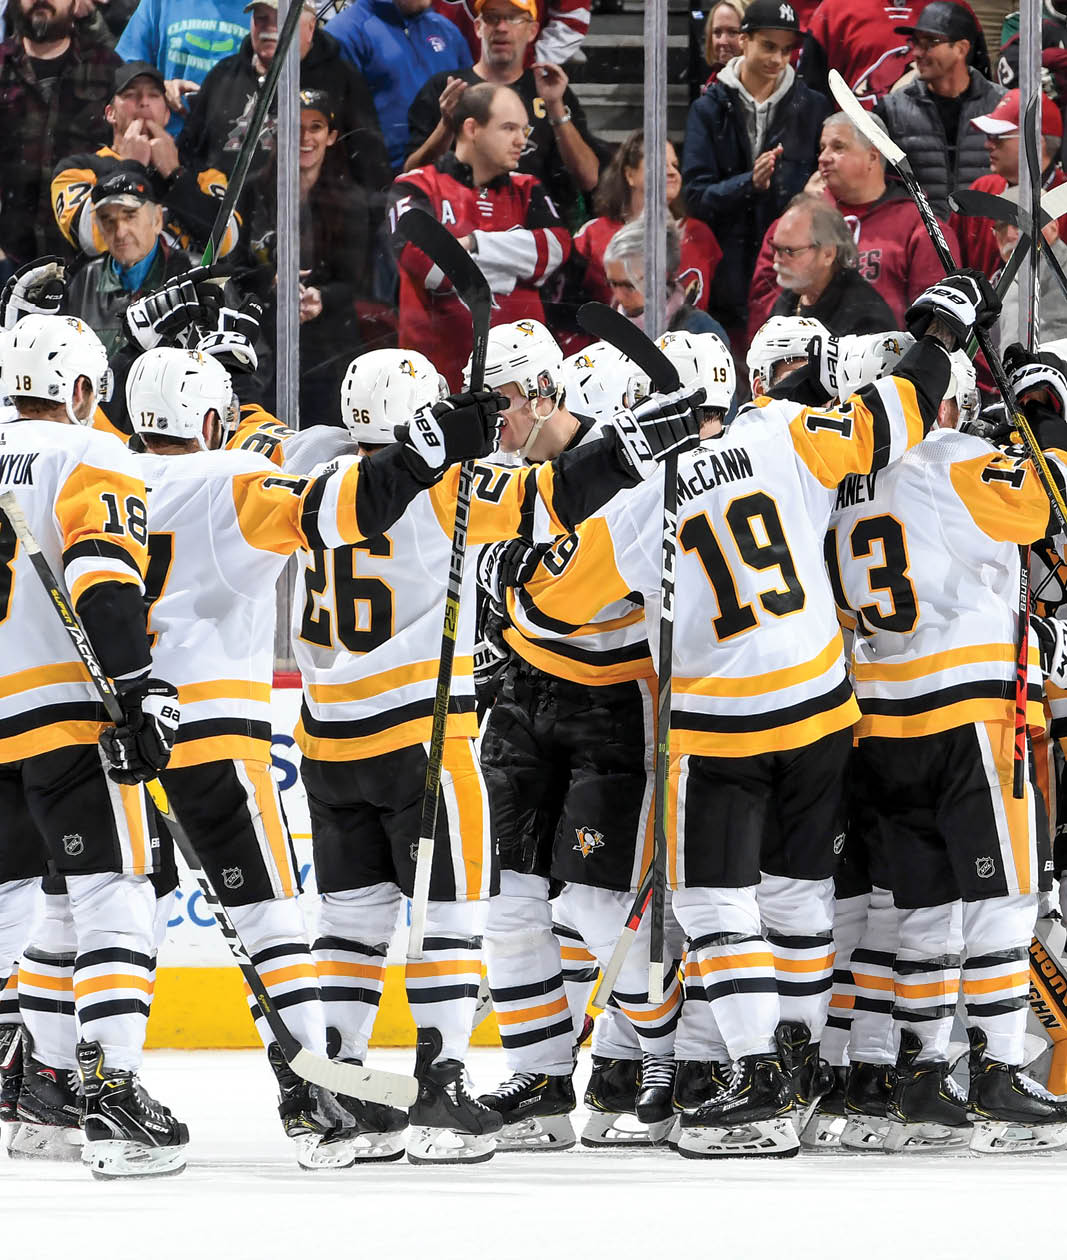 GLENDALE, ARIZONA - JANUARY 12: Goalie Tristian Jarry #35 of the Pittsburgh Penguins is surrounded by teammates as they celebrate a 4-3 shootout victory against the Arizona Coyotes during the NHL hockey game at Gila River Arena on January 12, 2020 in Glendale, Arizona  (Photo by Norm Hall NHLI via Getty Images)